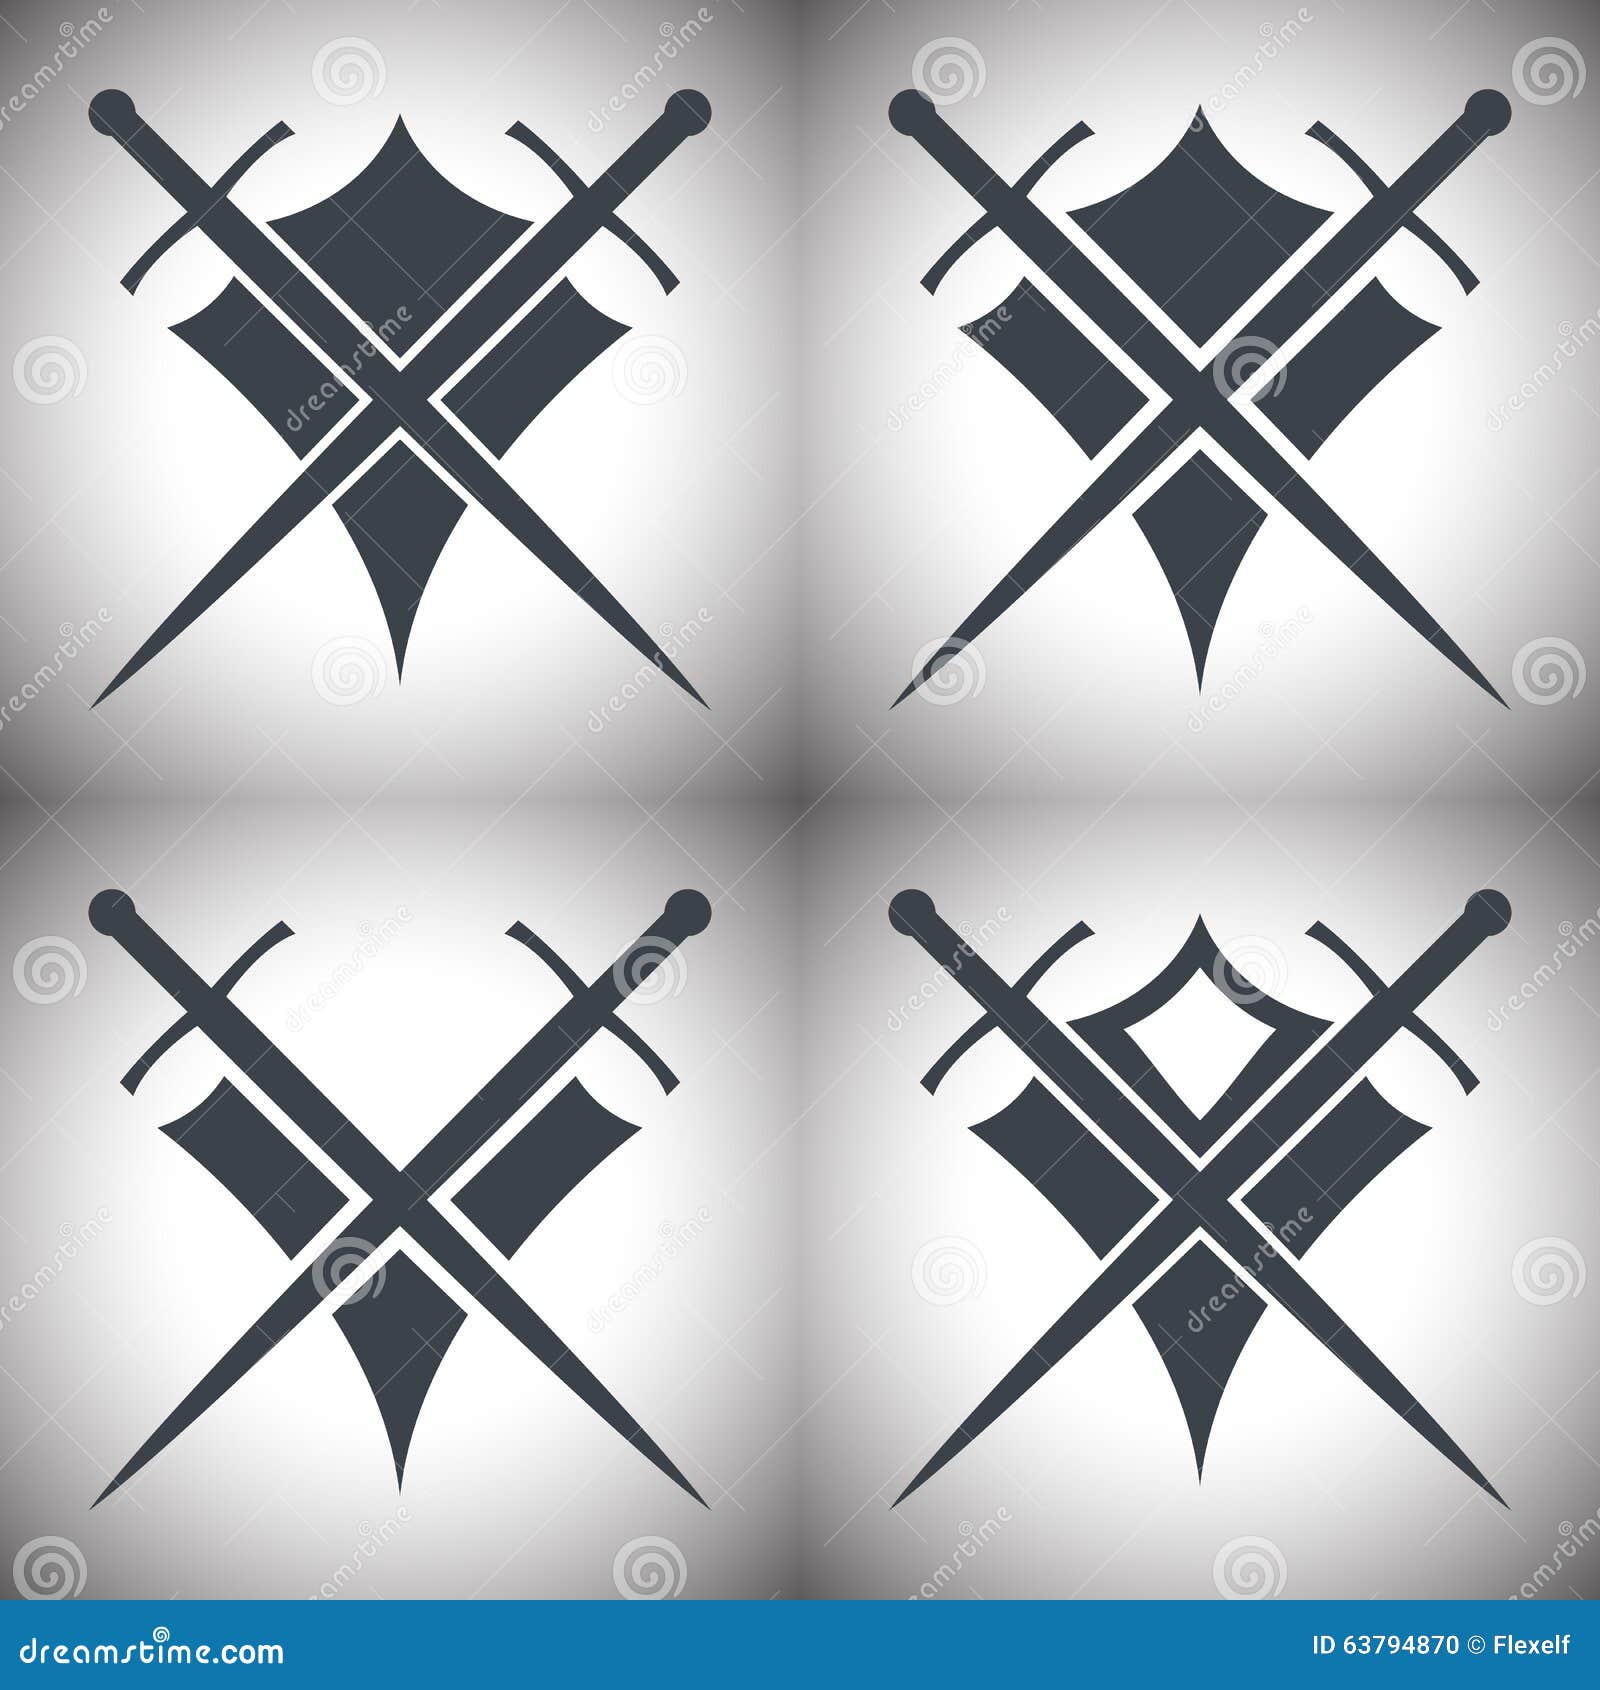 Abstract illustration - shield and sword icons